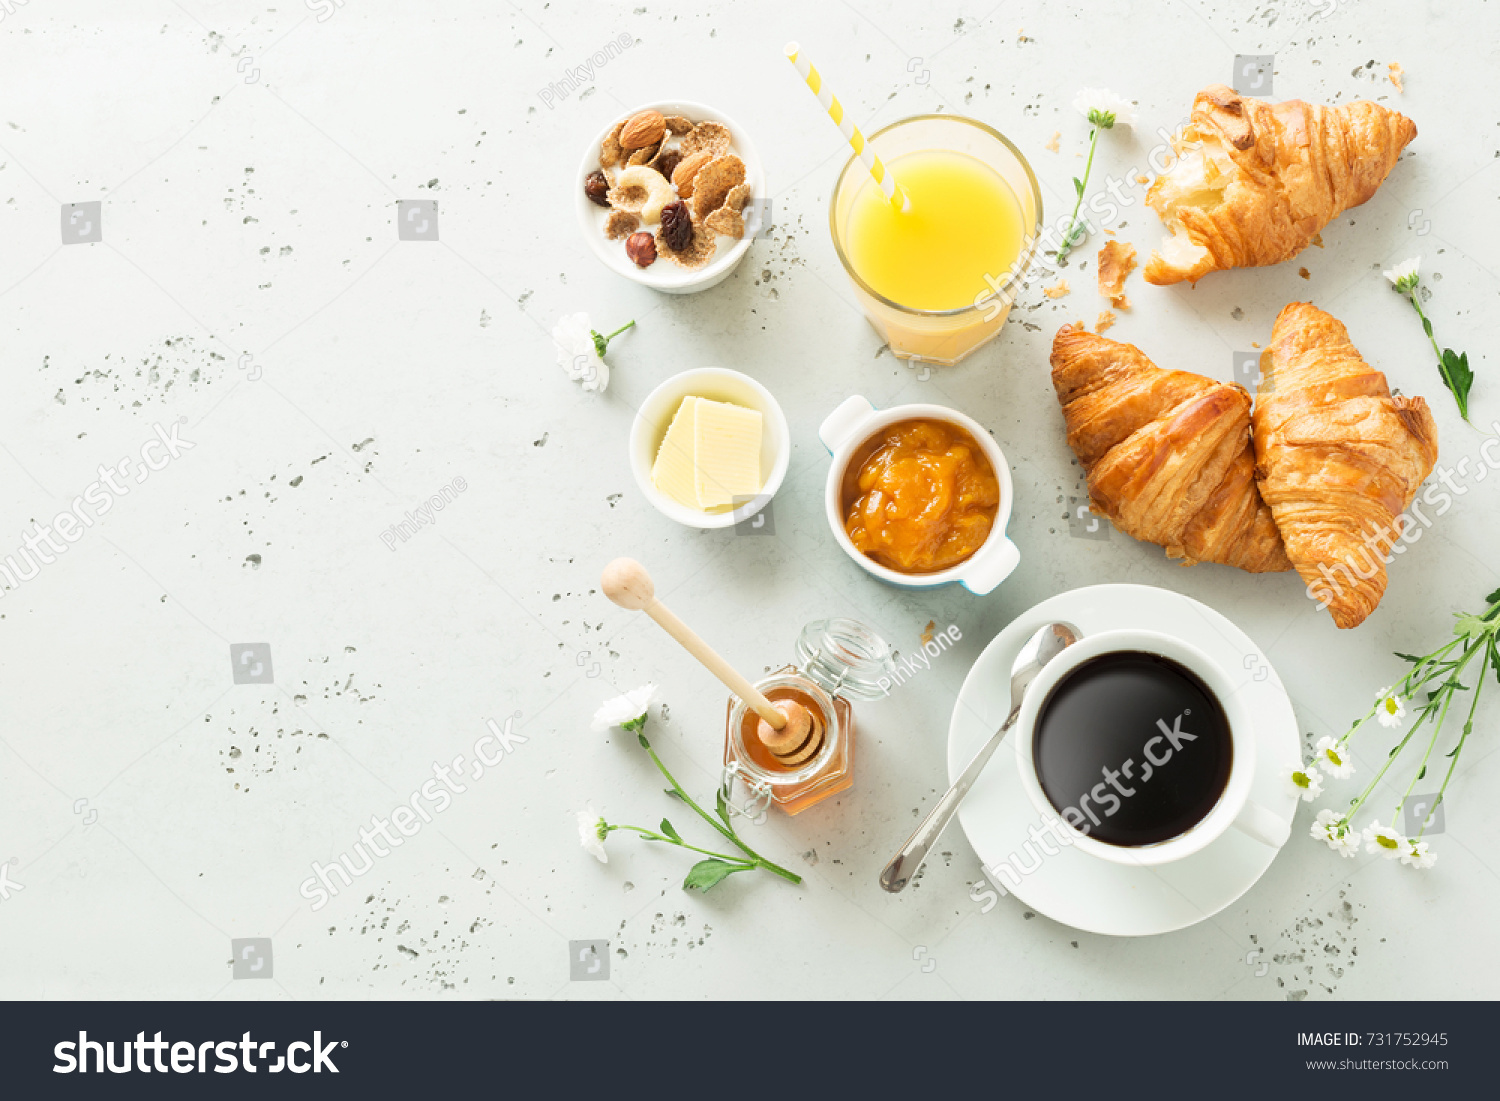 Continental breakfast captured from above (top view, flat lay). Coffee, orange juice, croissants, jam, honey and flowers. Grey stone worktop as background. Layout with free text (copy) space. #731752945